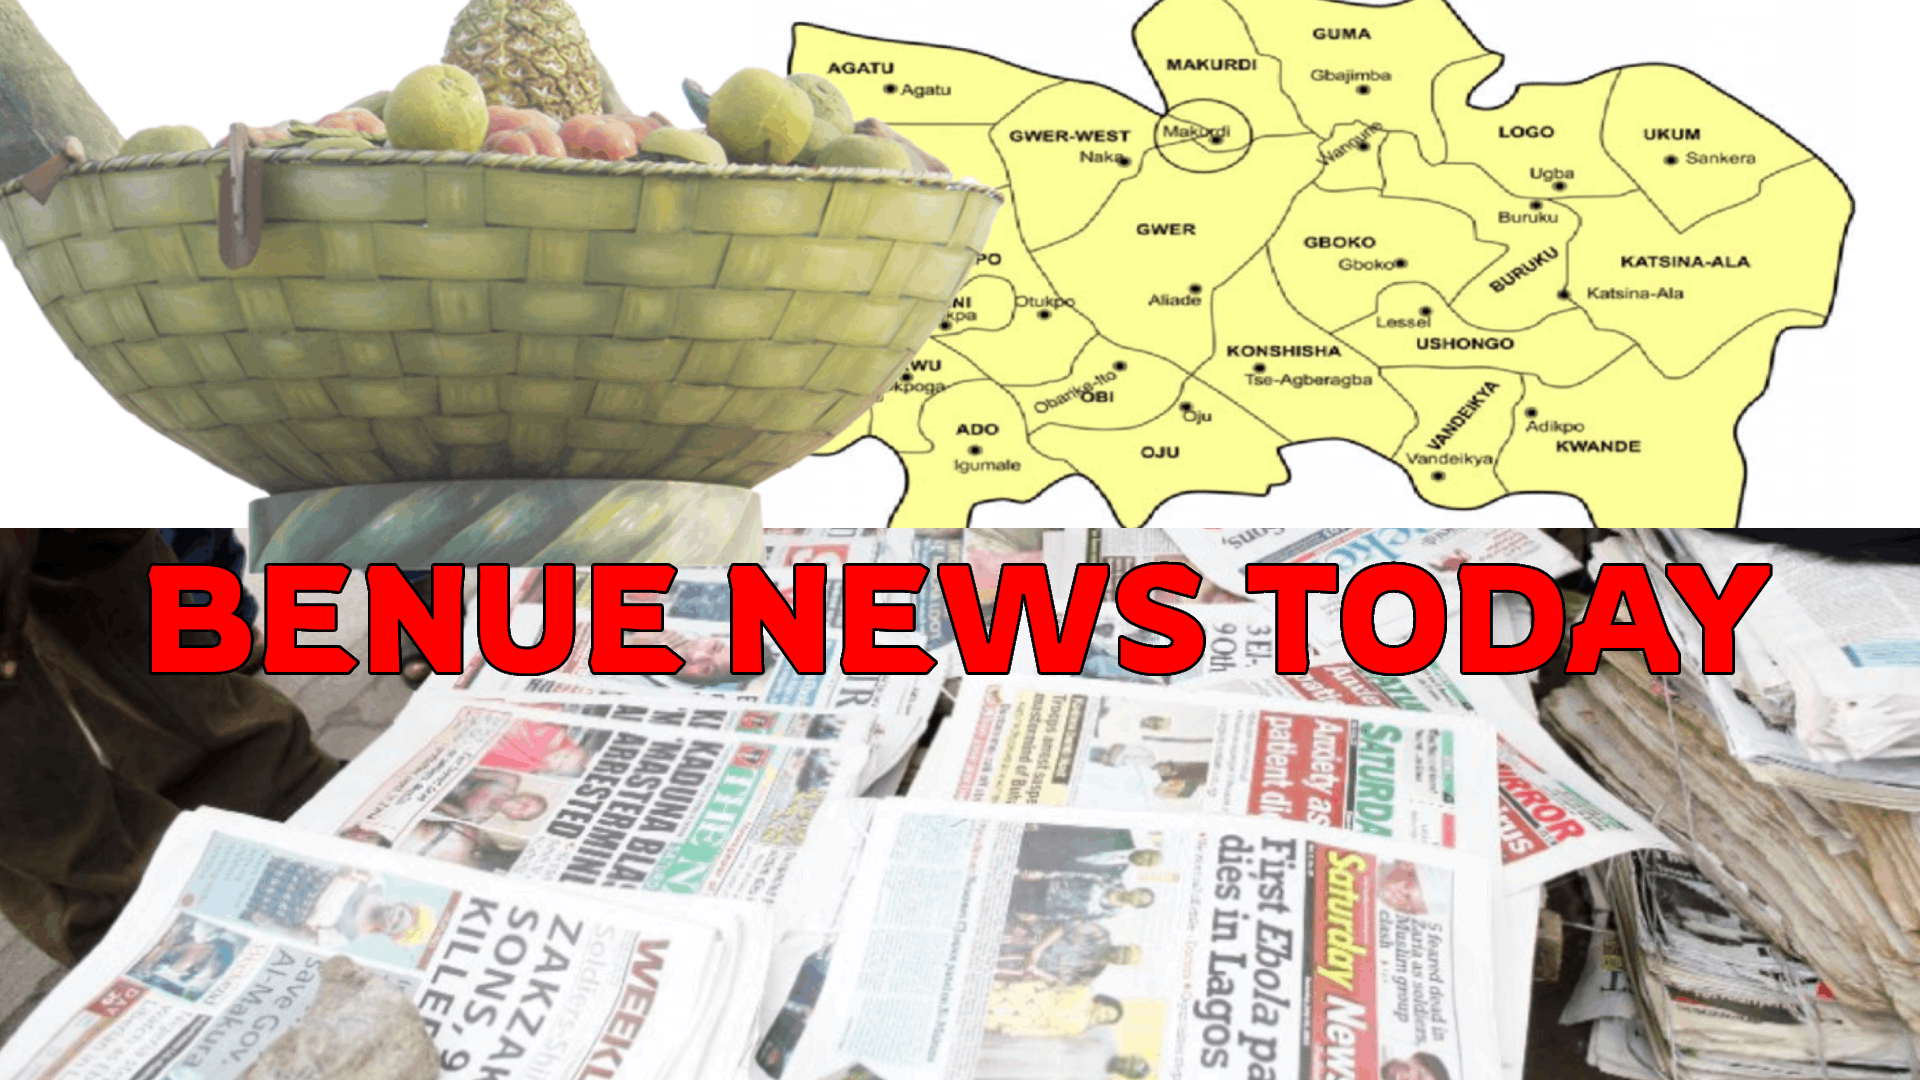 Latest Benue News today, Monday, August 1 2022